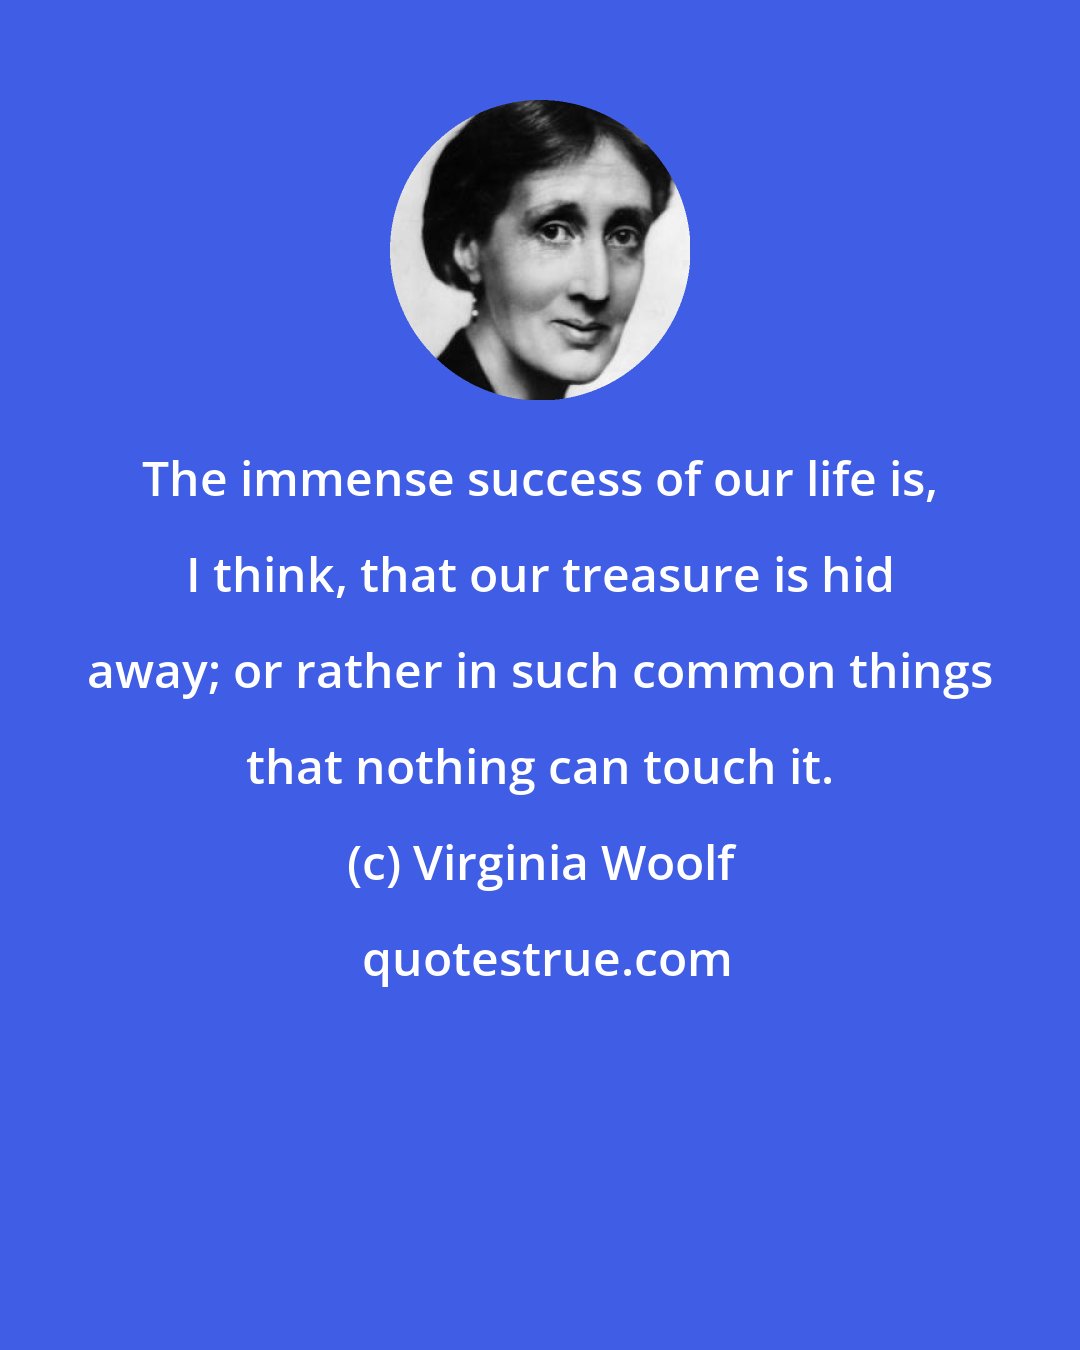 Virginia Woolf: The immense success of our life is, I think, that our treasure is hid away; or rather in such common things that nothing can touch it.